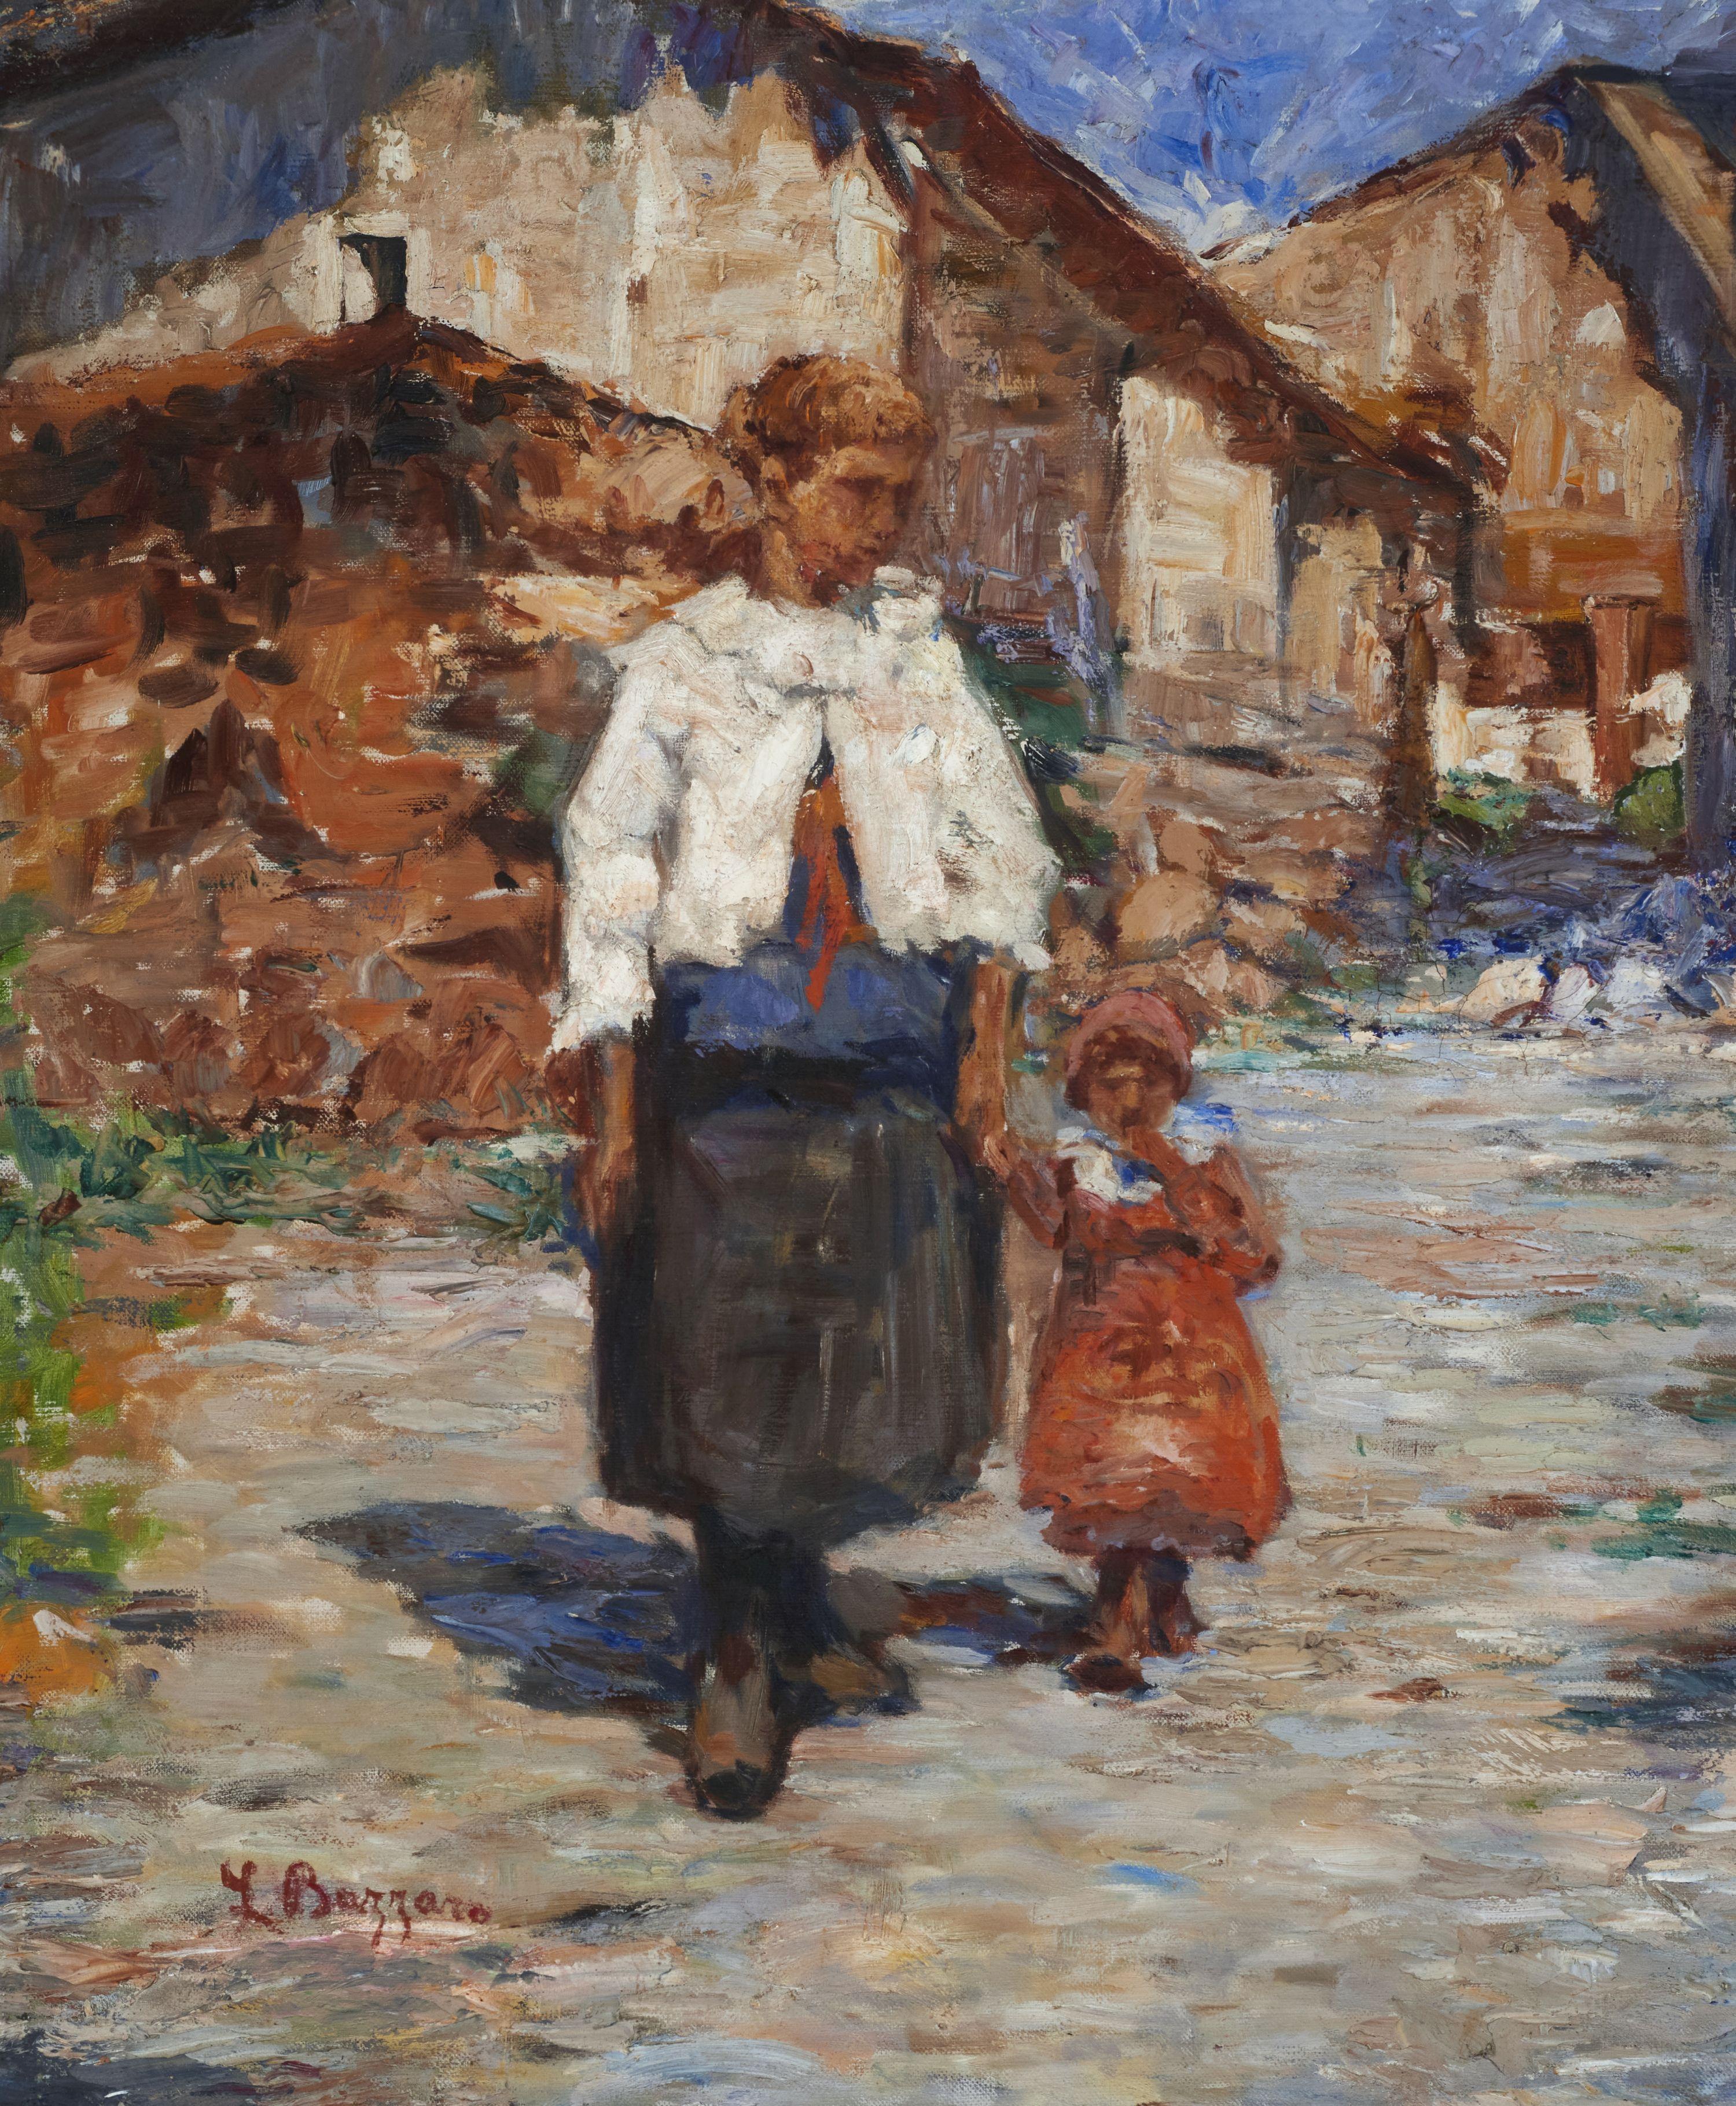 Painting, oil on canvas, measuring 100 x 80 cm without frame and 125 x 100 cm with frame depicting the Piazzetta of Cogne by the painter Leonardo Bazzaro, signed and dated 1927.

The sketch of this painting is published in the collection dedicated